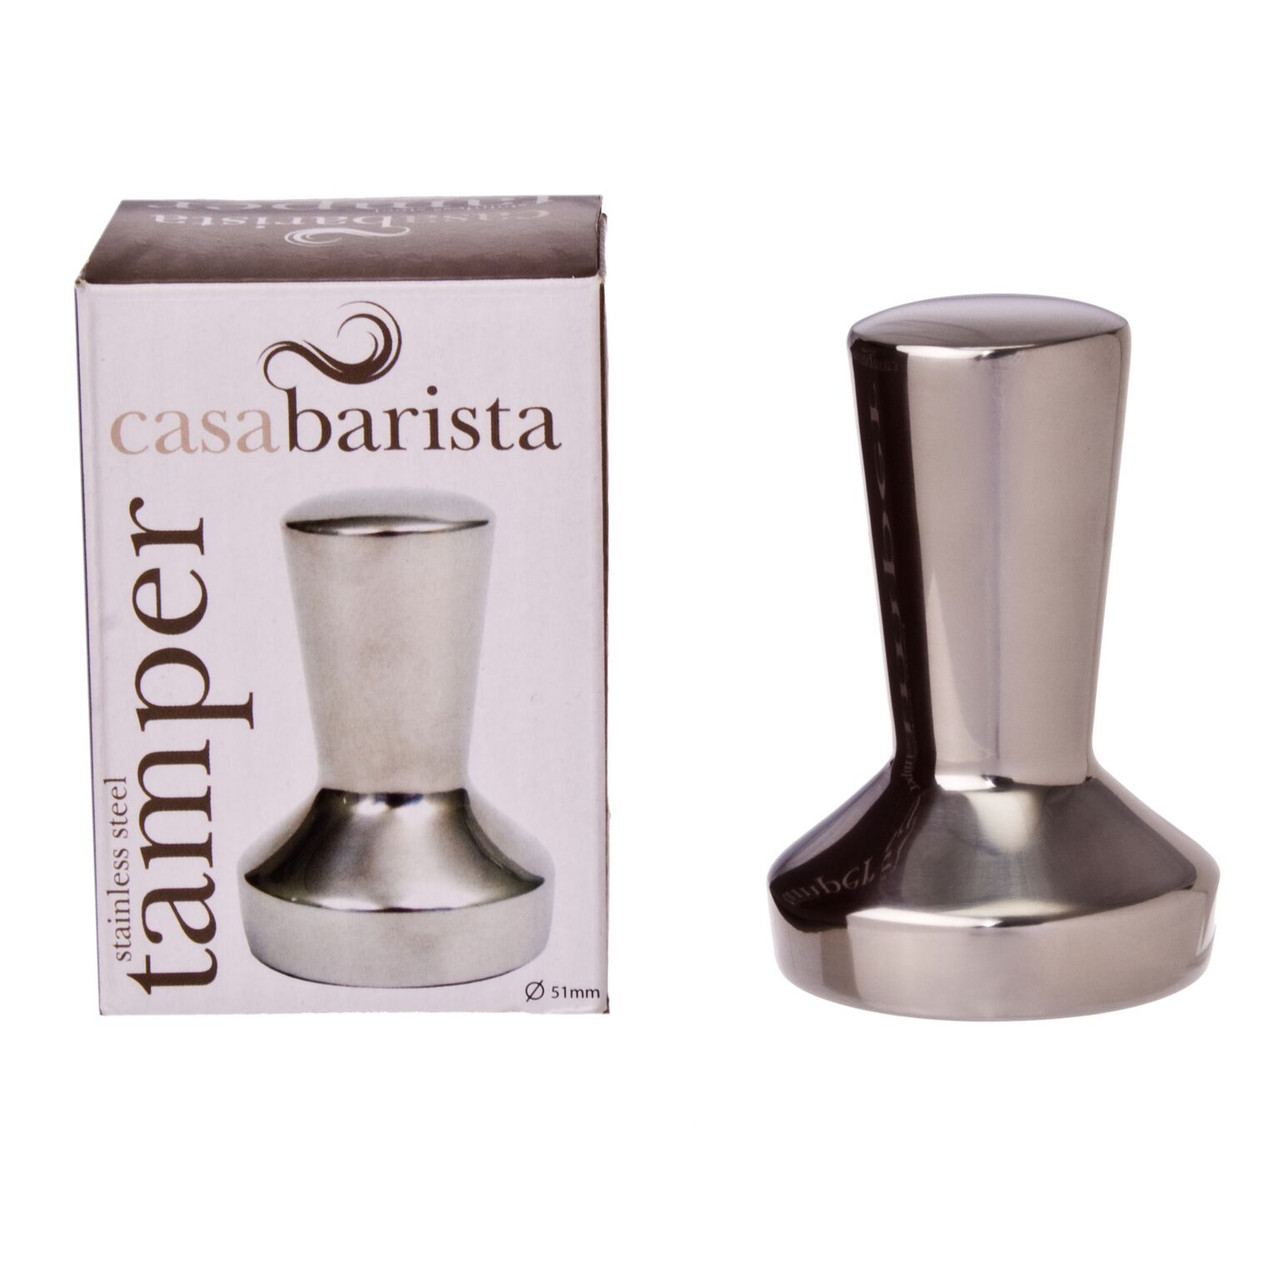 Coffee Tamper 51mm - Marcia's on Montague